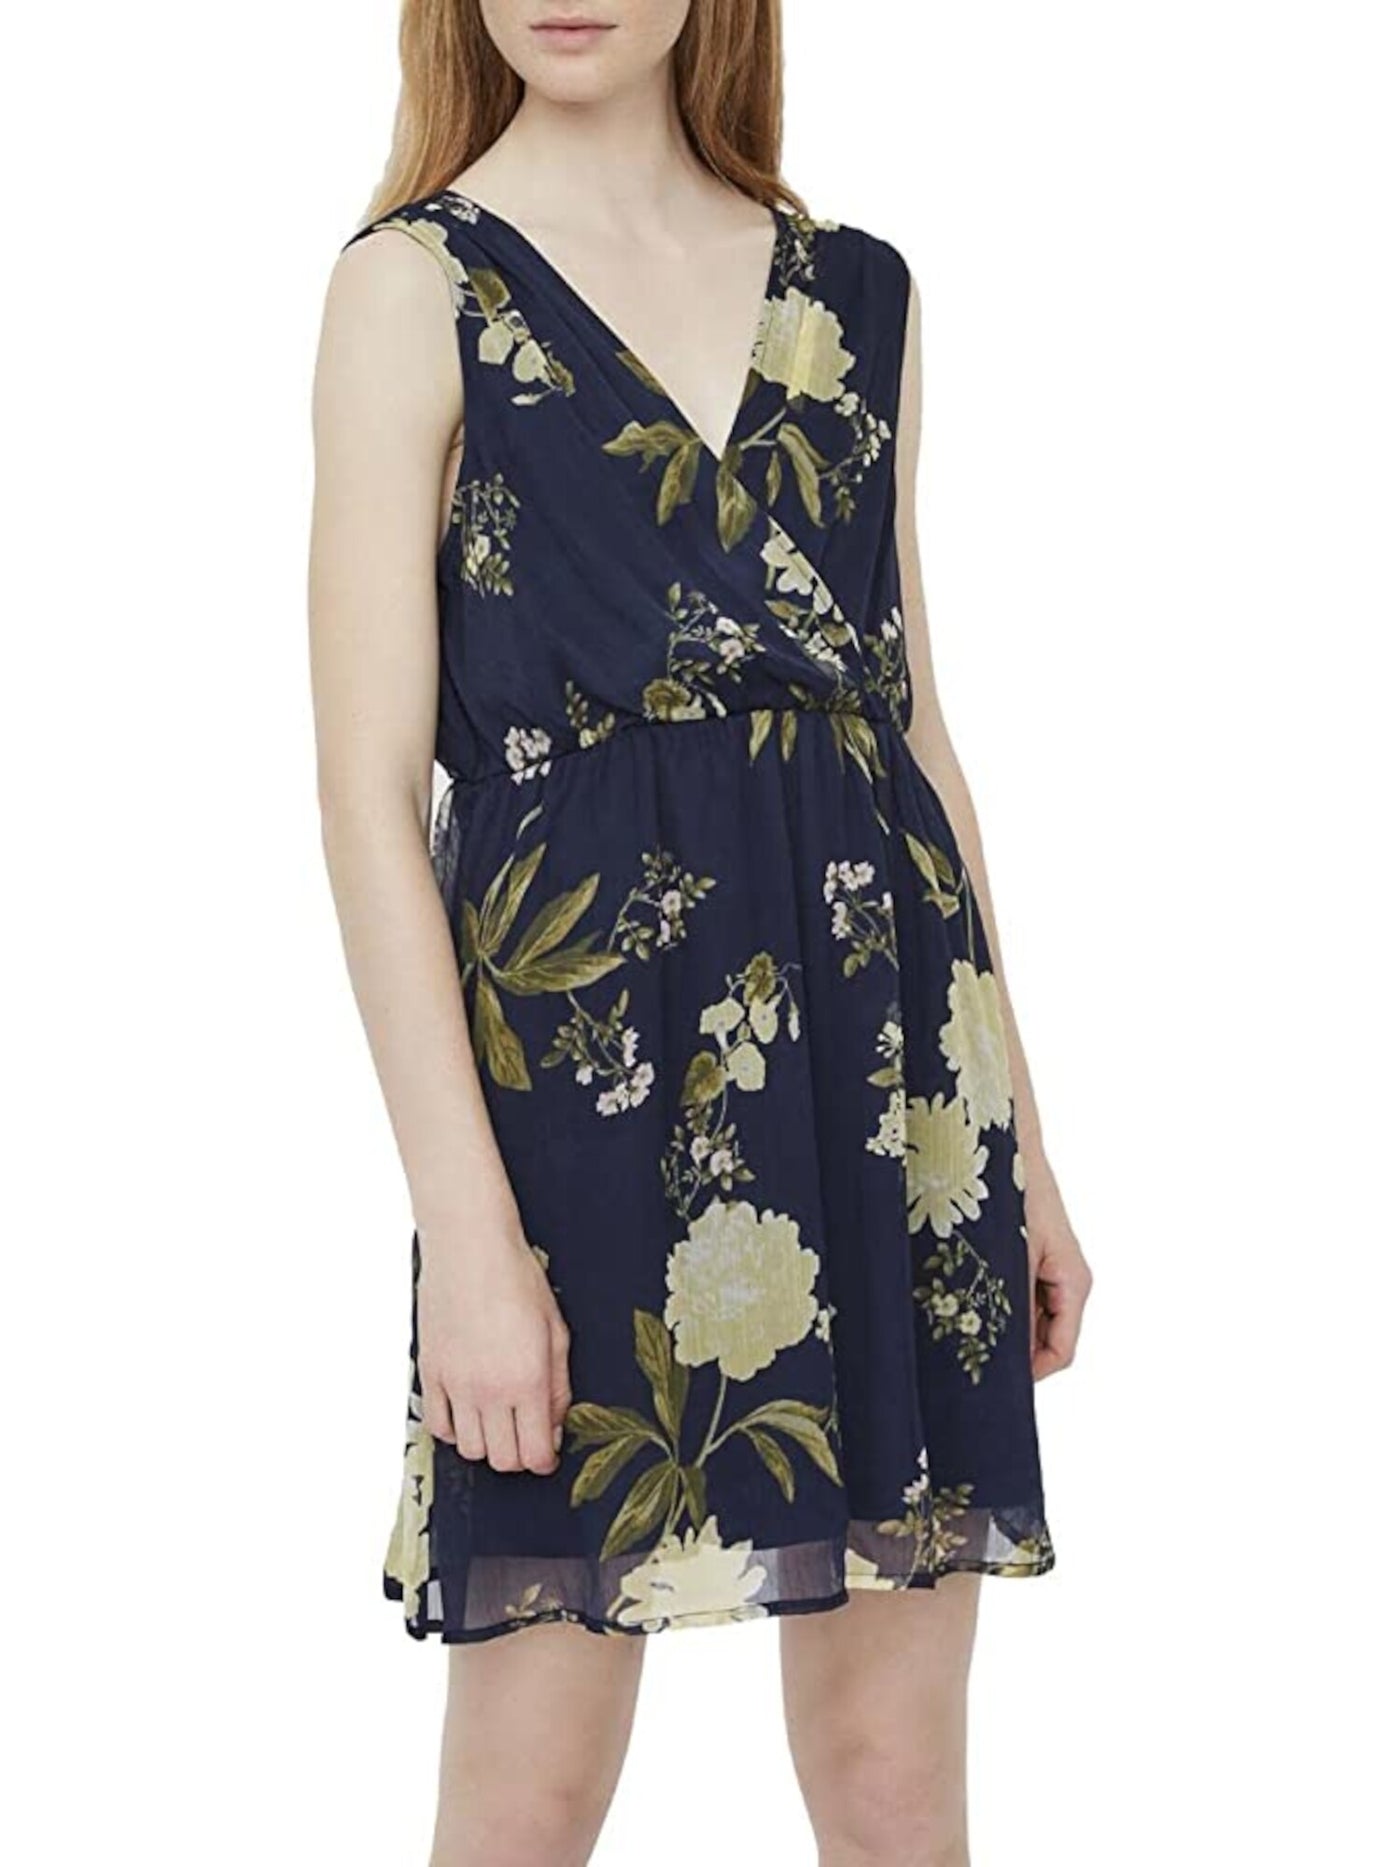 VERO MODA Womens Blue Stretch Sheer Lined Floral Sleeveless Surplice Neckline Above The Knee Evening Fit + Flare Dress XS